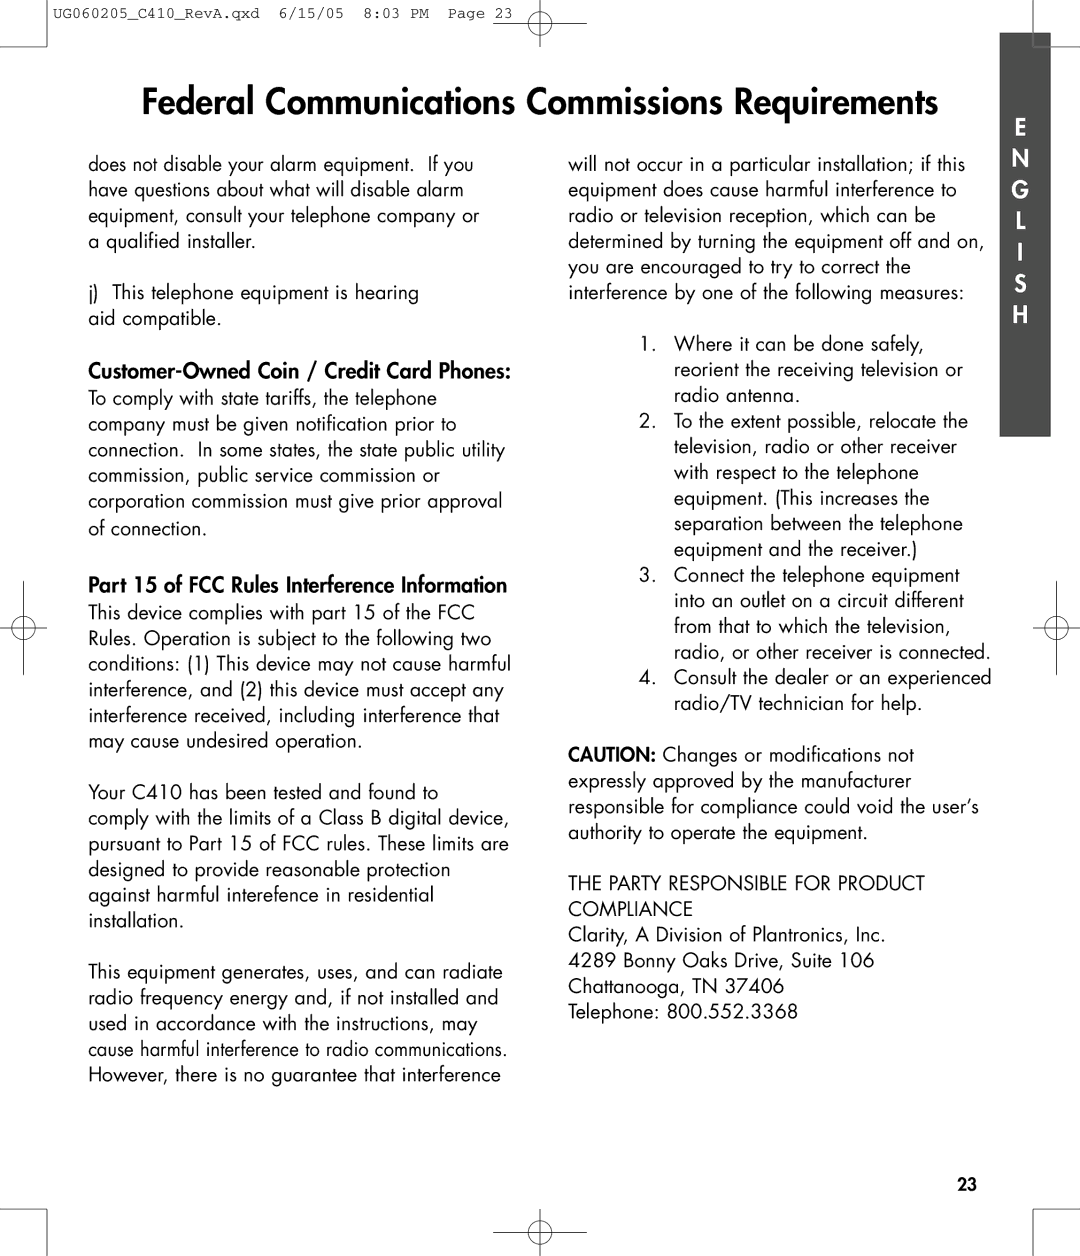 Clarity C410 owner manual Customer-Owned Coin / Credit Card Phones, Part 15 of FCC Rules Interference Information 